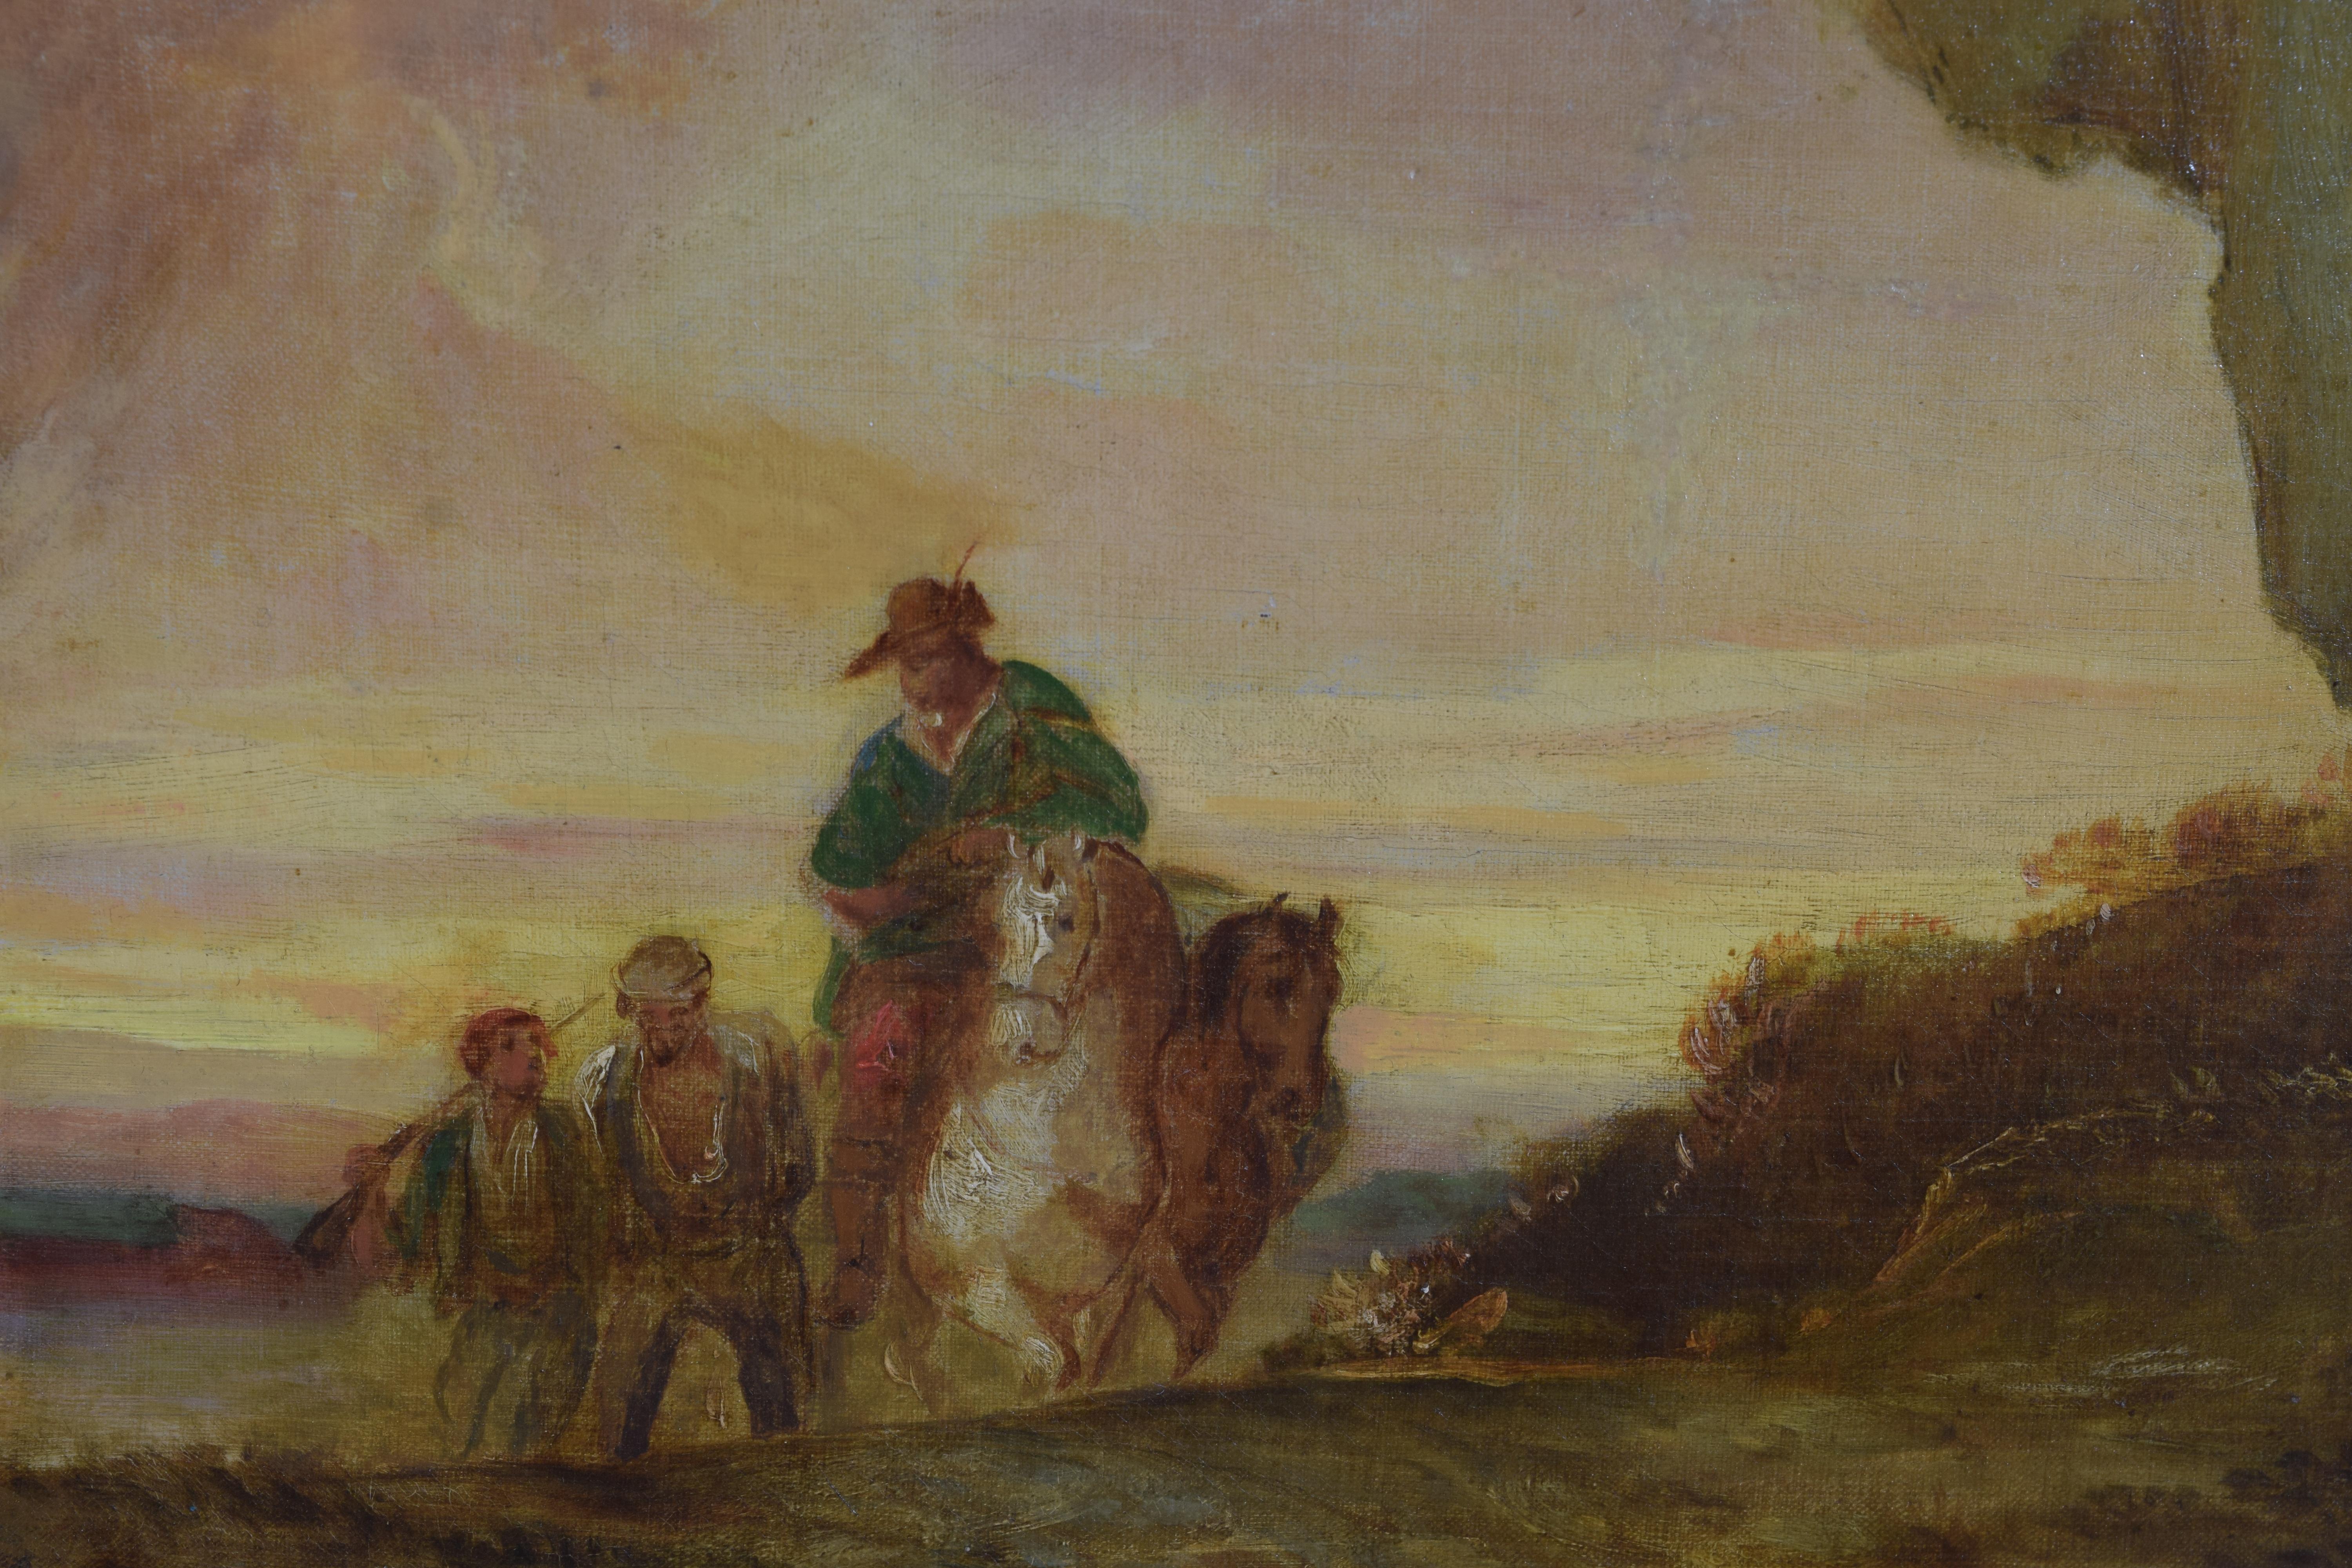 English, Oil on Canvas, “The Capture”, Attributed to T. Stothart (1755-1834) For Sale 5